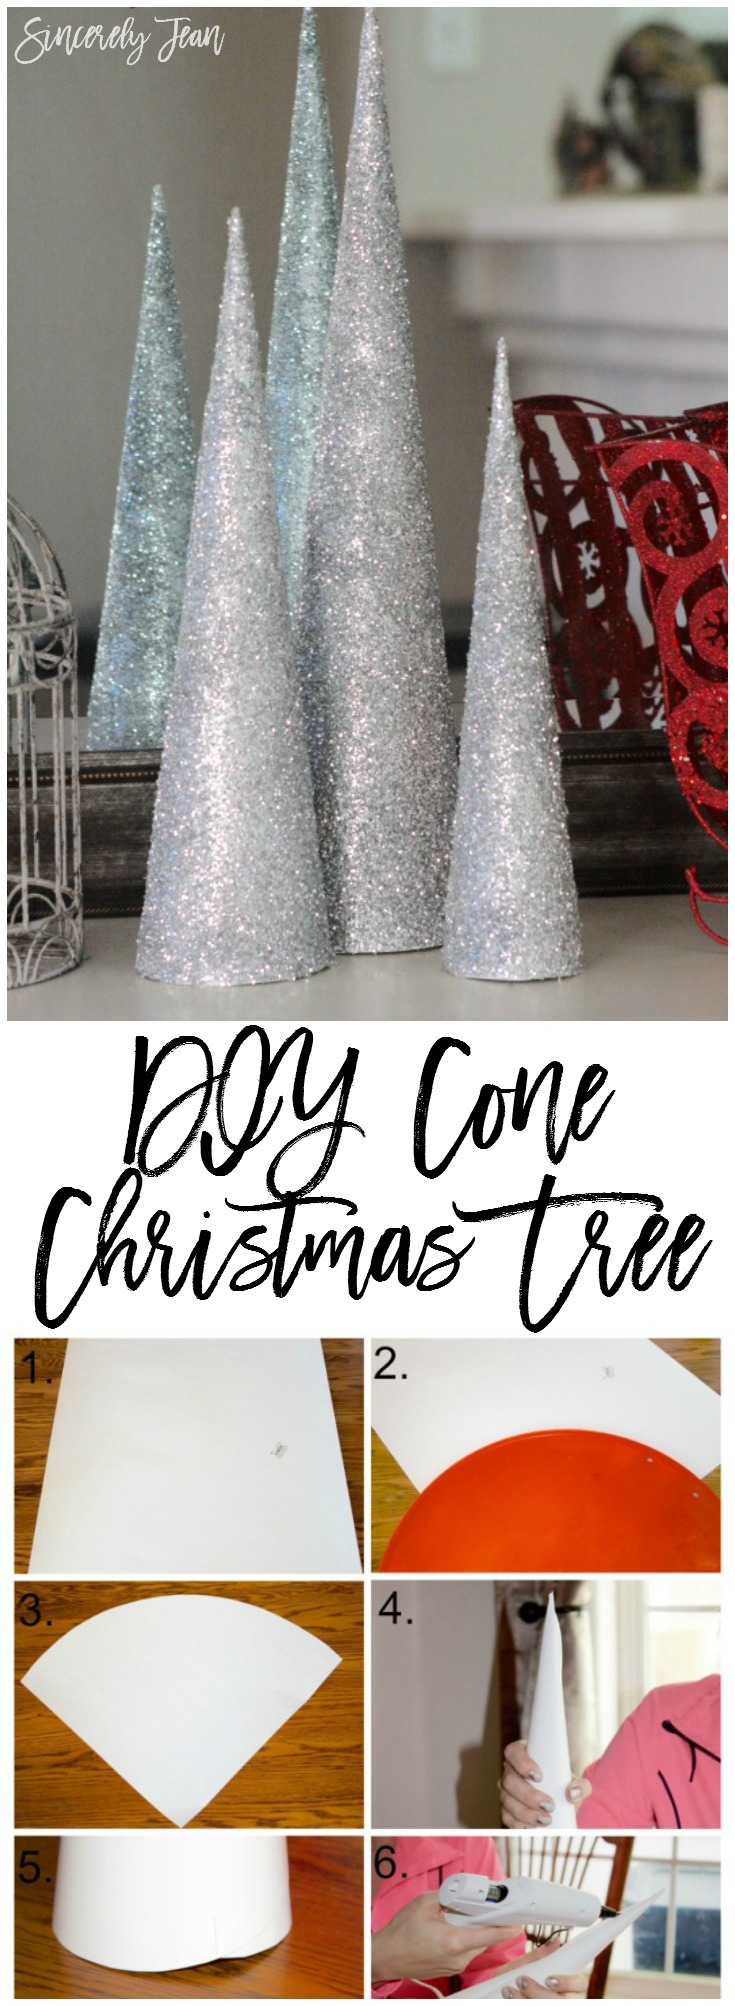 DIY Cone Christmas Tree - Step by step tutorial for a simple and beautiful Christmas craft! | www.sincerelyjean.com